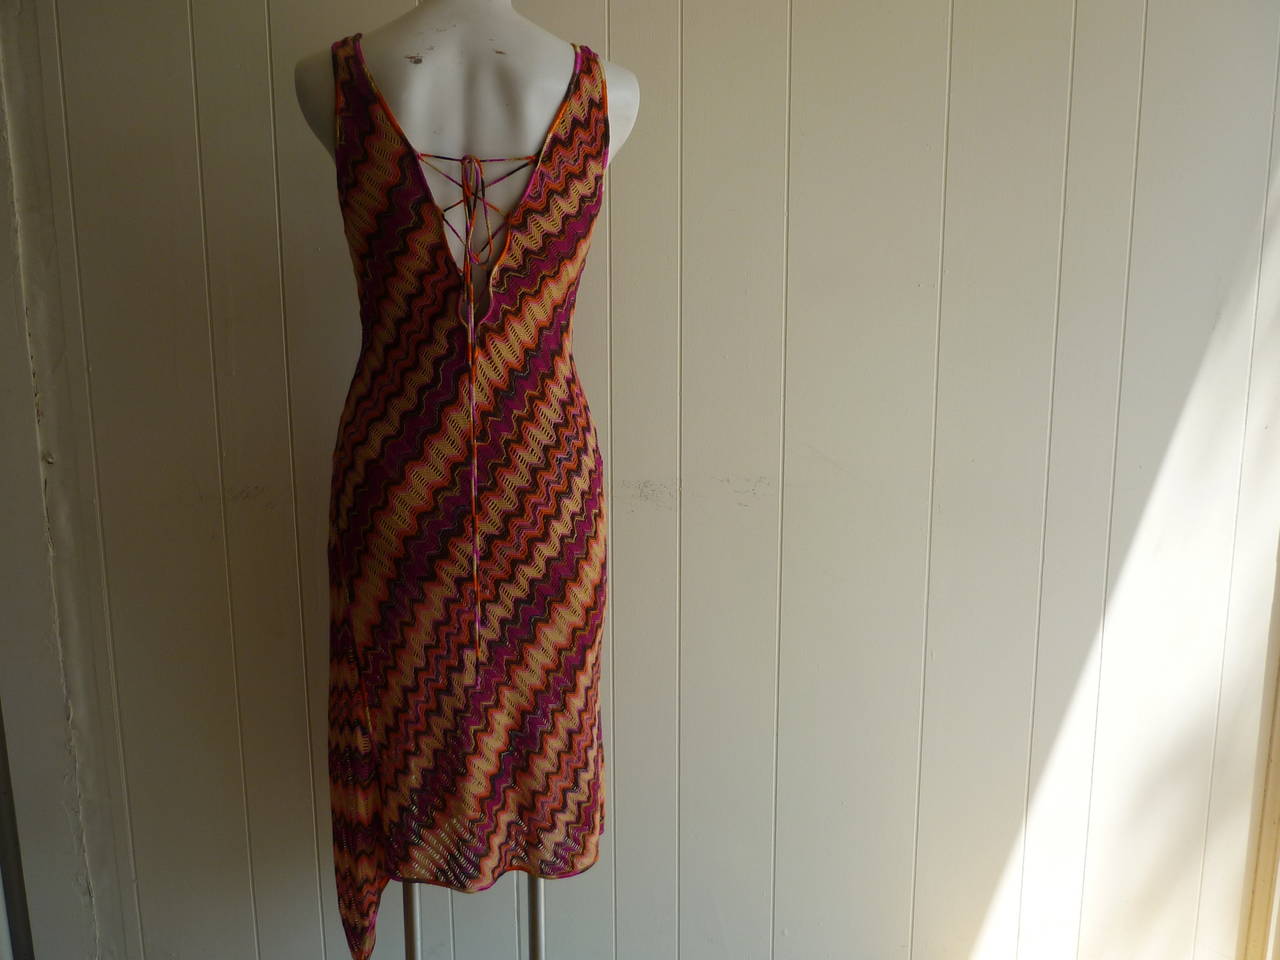 This fully lined crochet dress in the very recognizable Missoni pattern has some lovely details including a v-neck, uneven hem line and criss-cross lace up back.